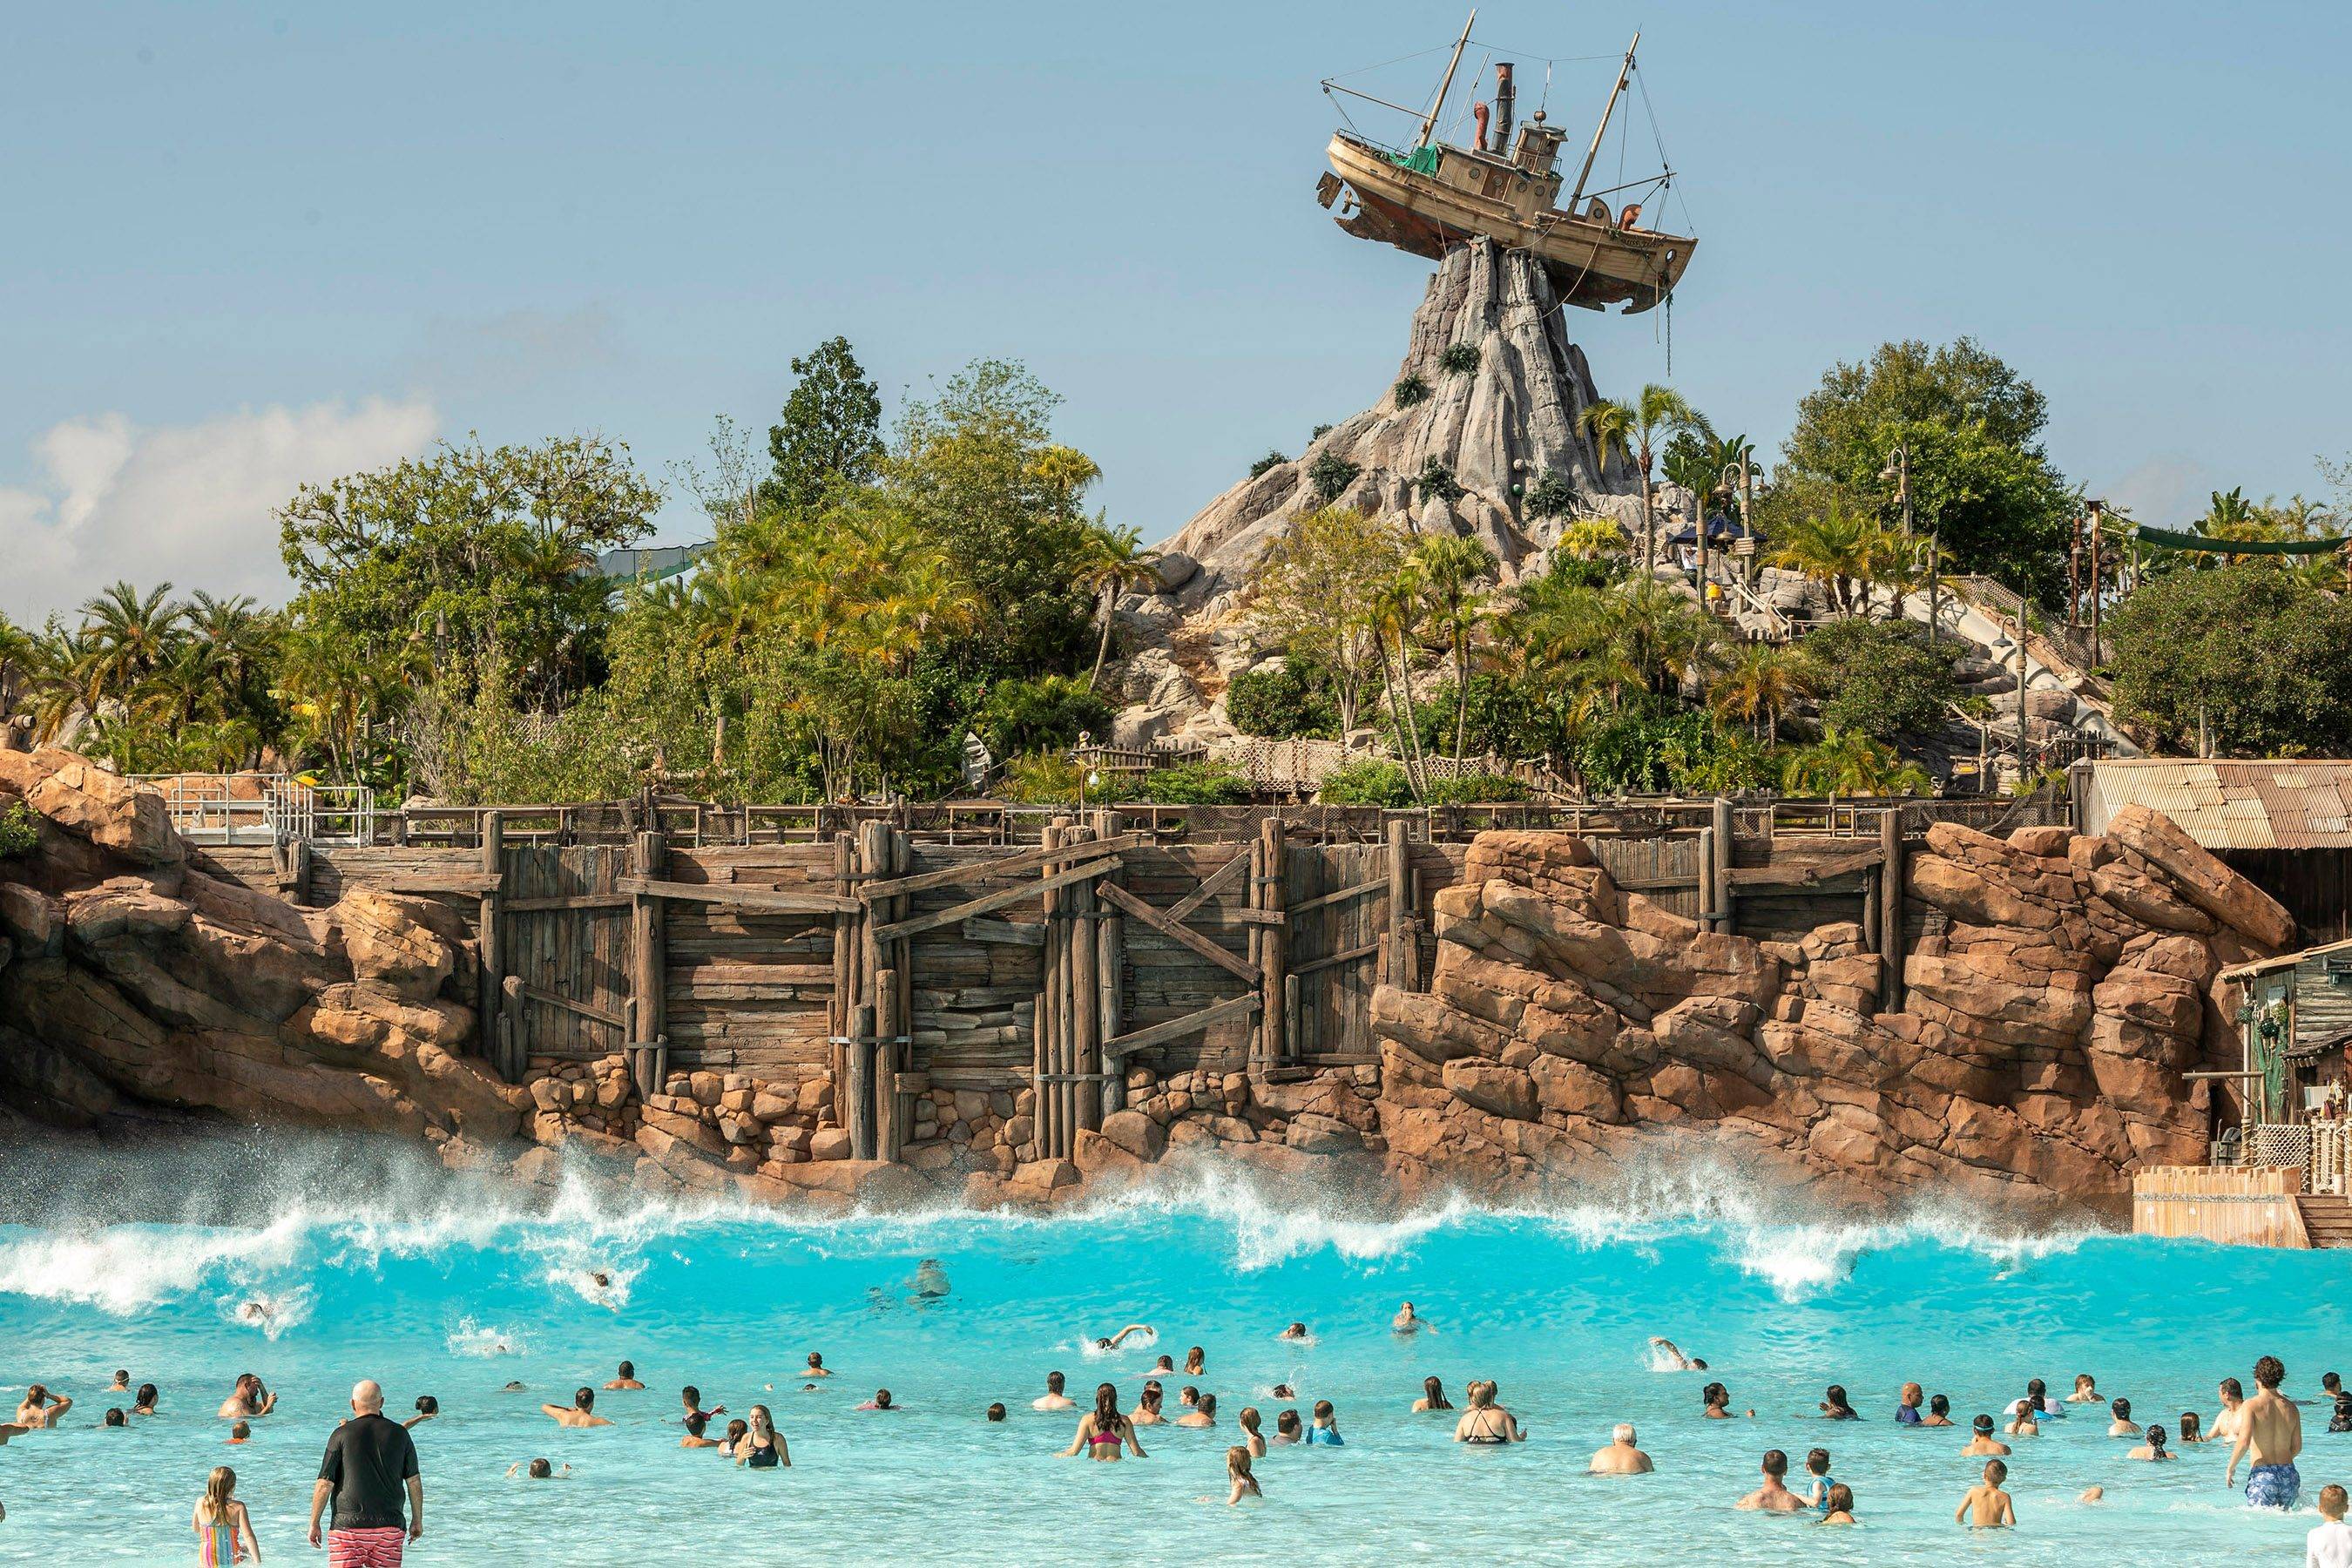 Lows today of 50F have closed Disney's Typhoon Lagoon water park